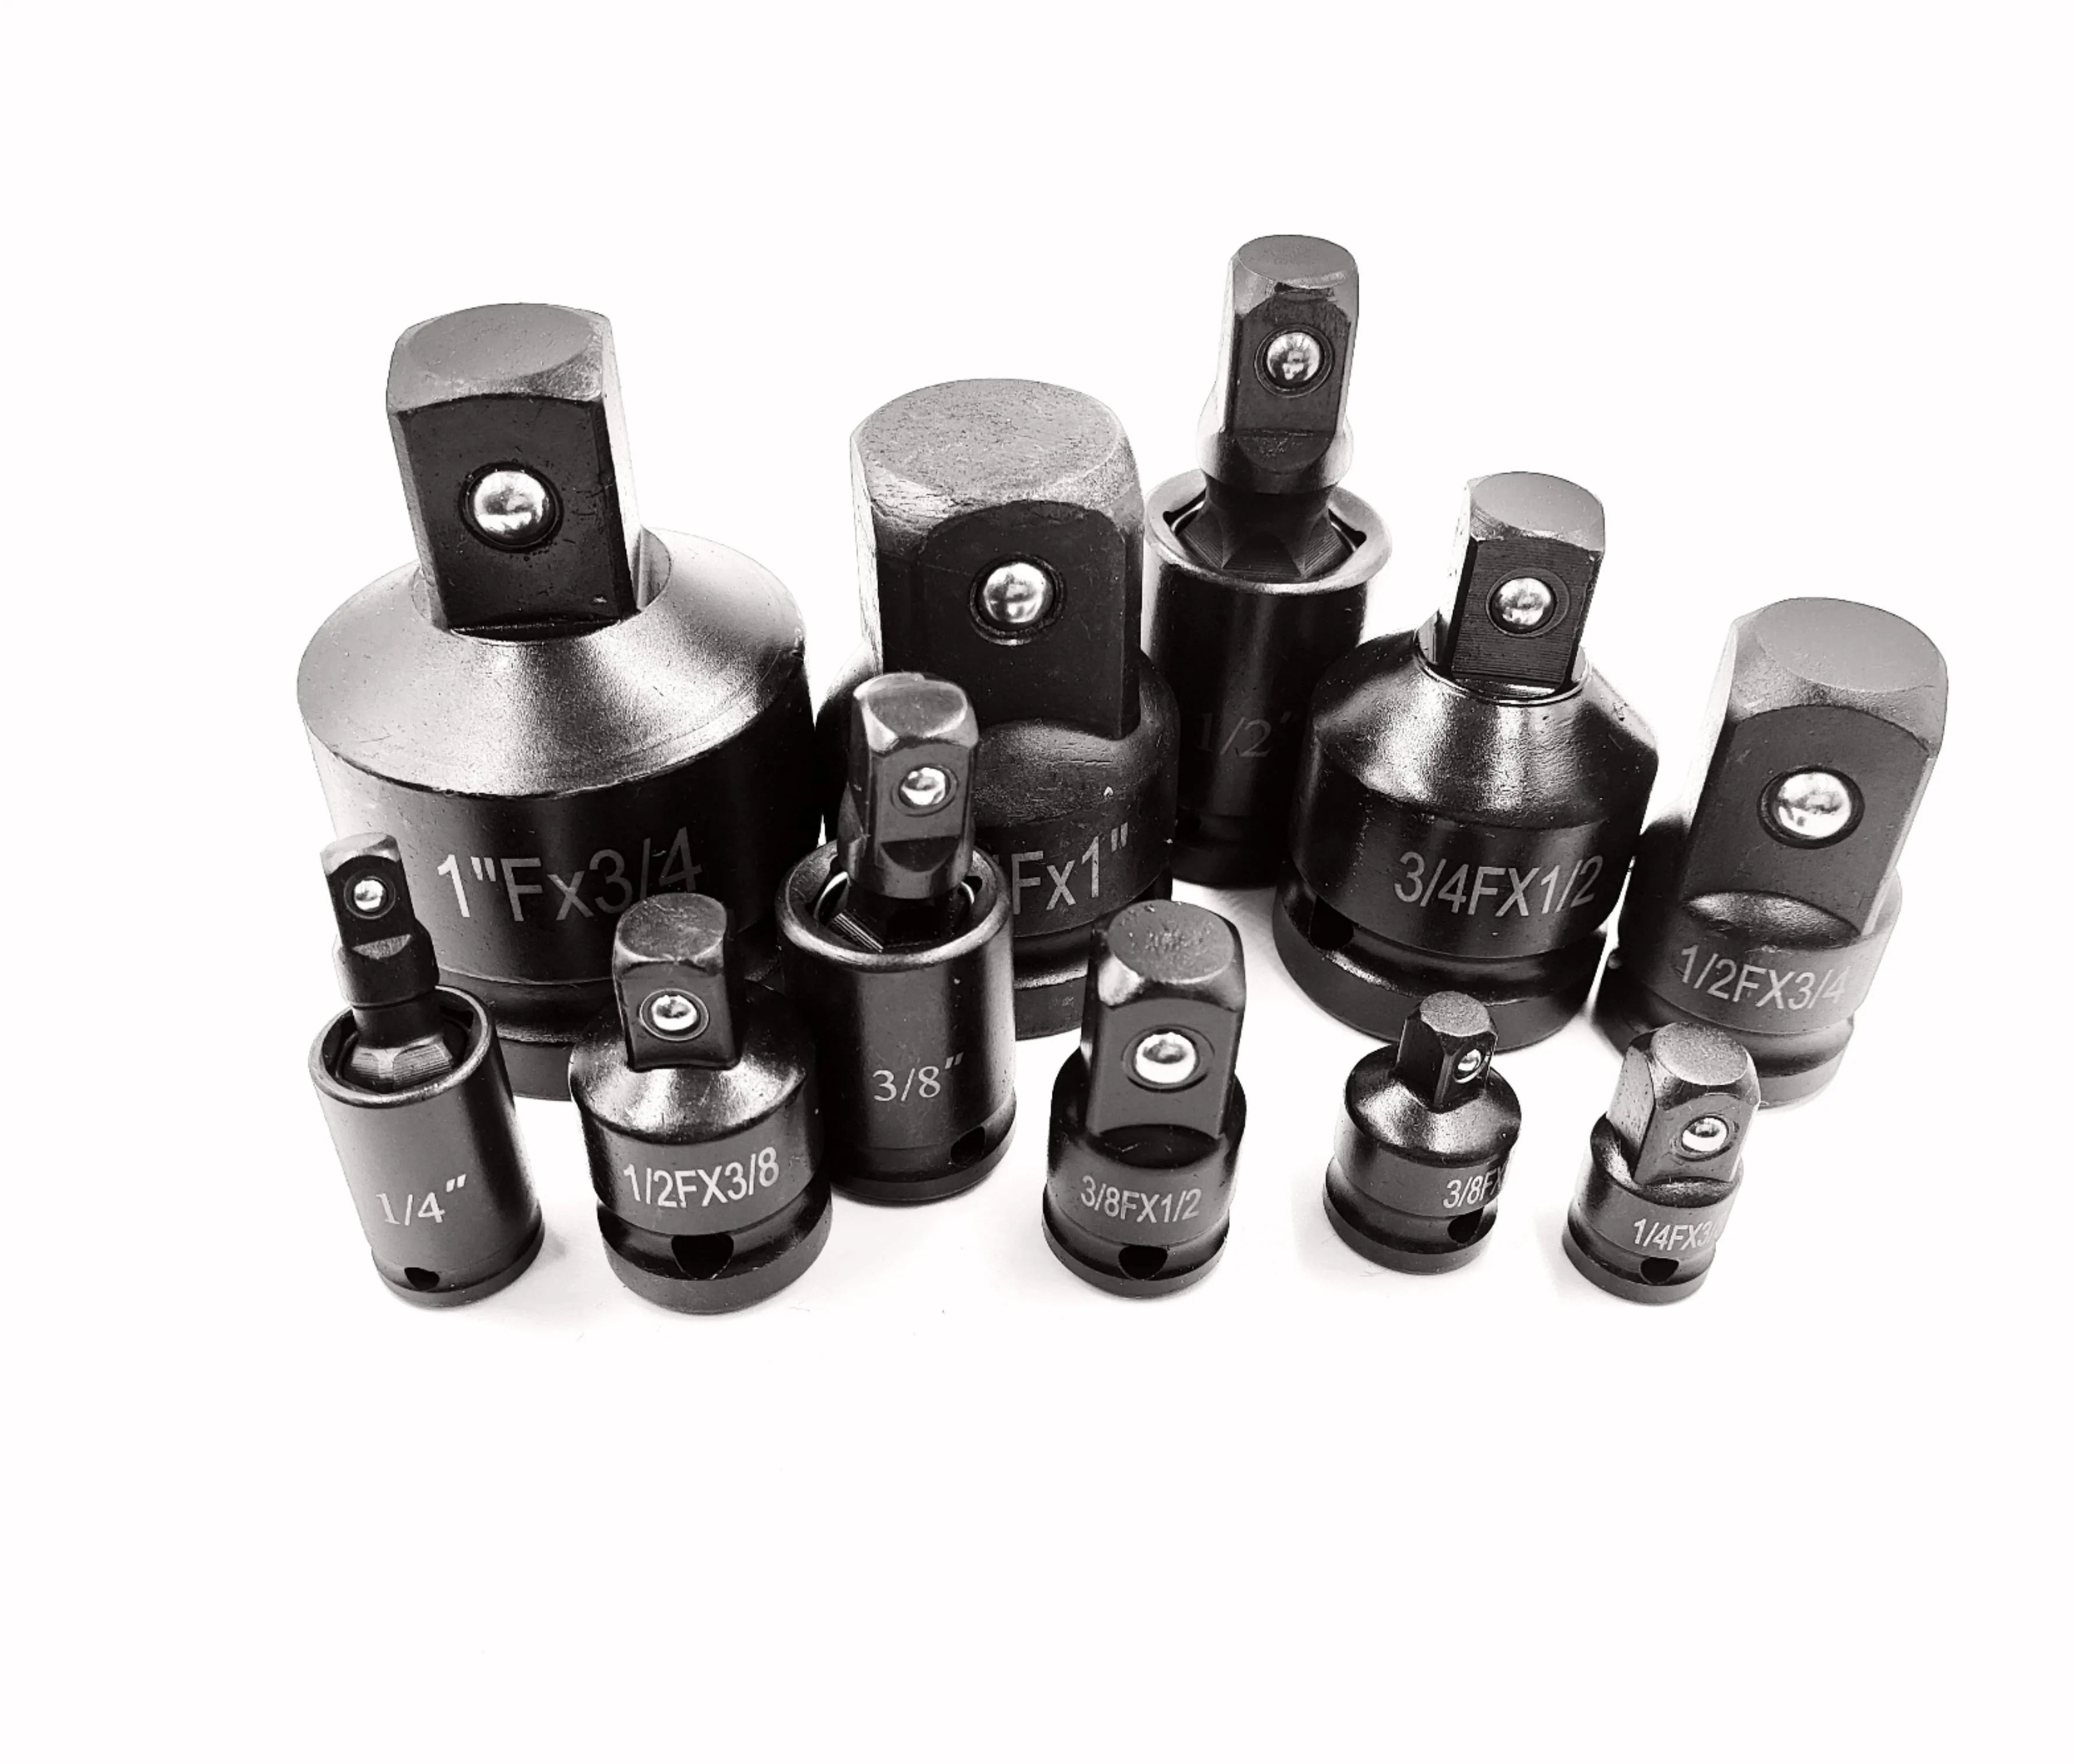 Socket & universal joints of various specifications